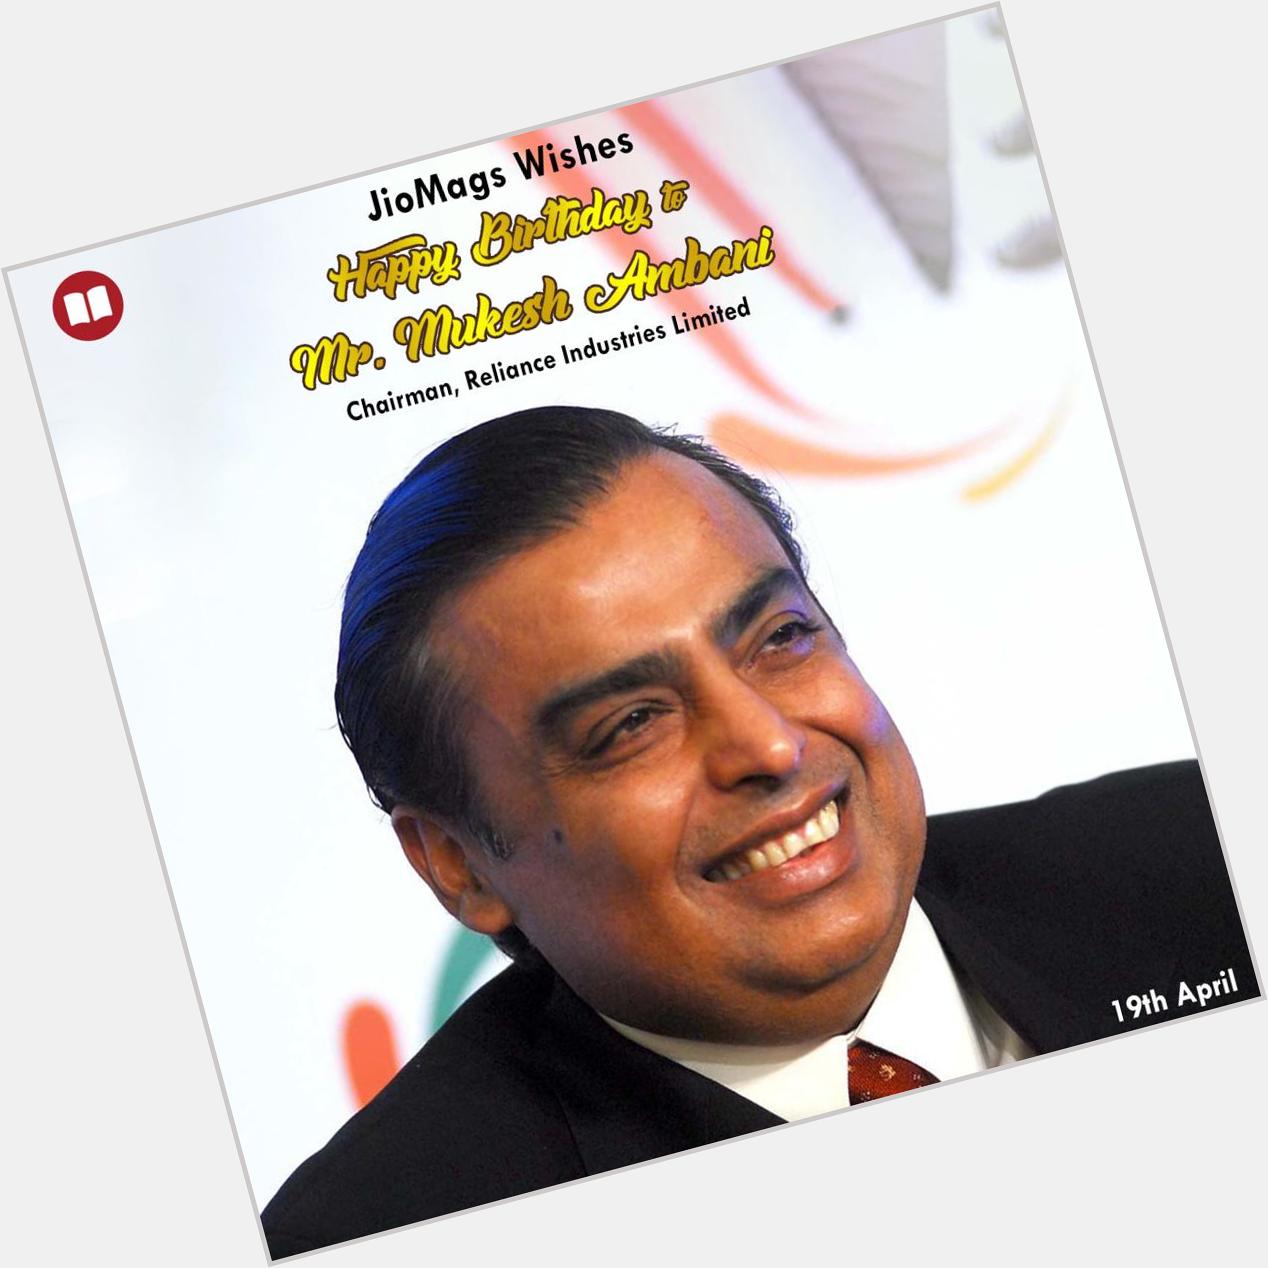 JioMags wishes the most powerful businessmen, Mukesh Ambani a very happy birthday! 